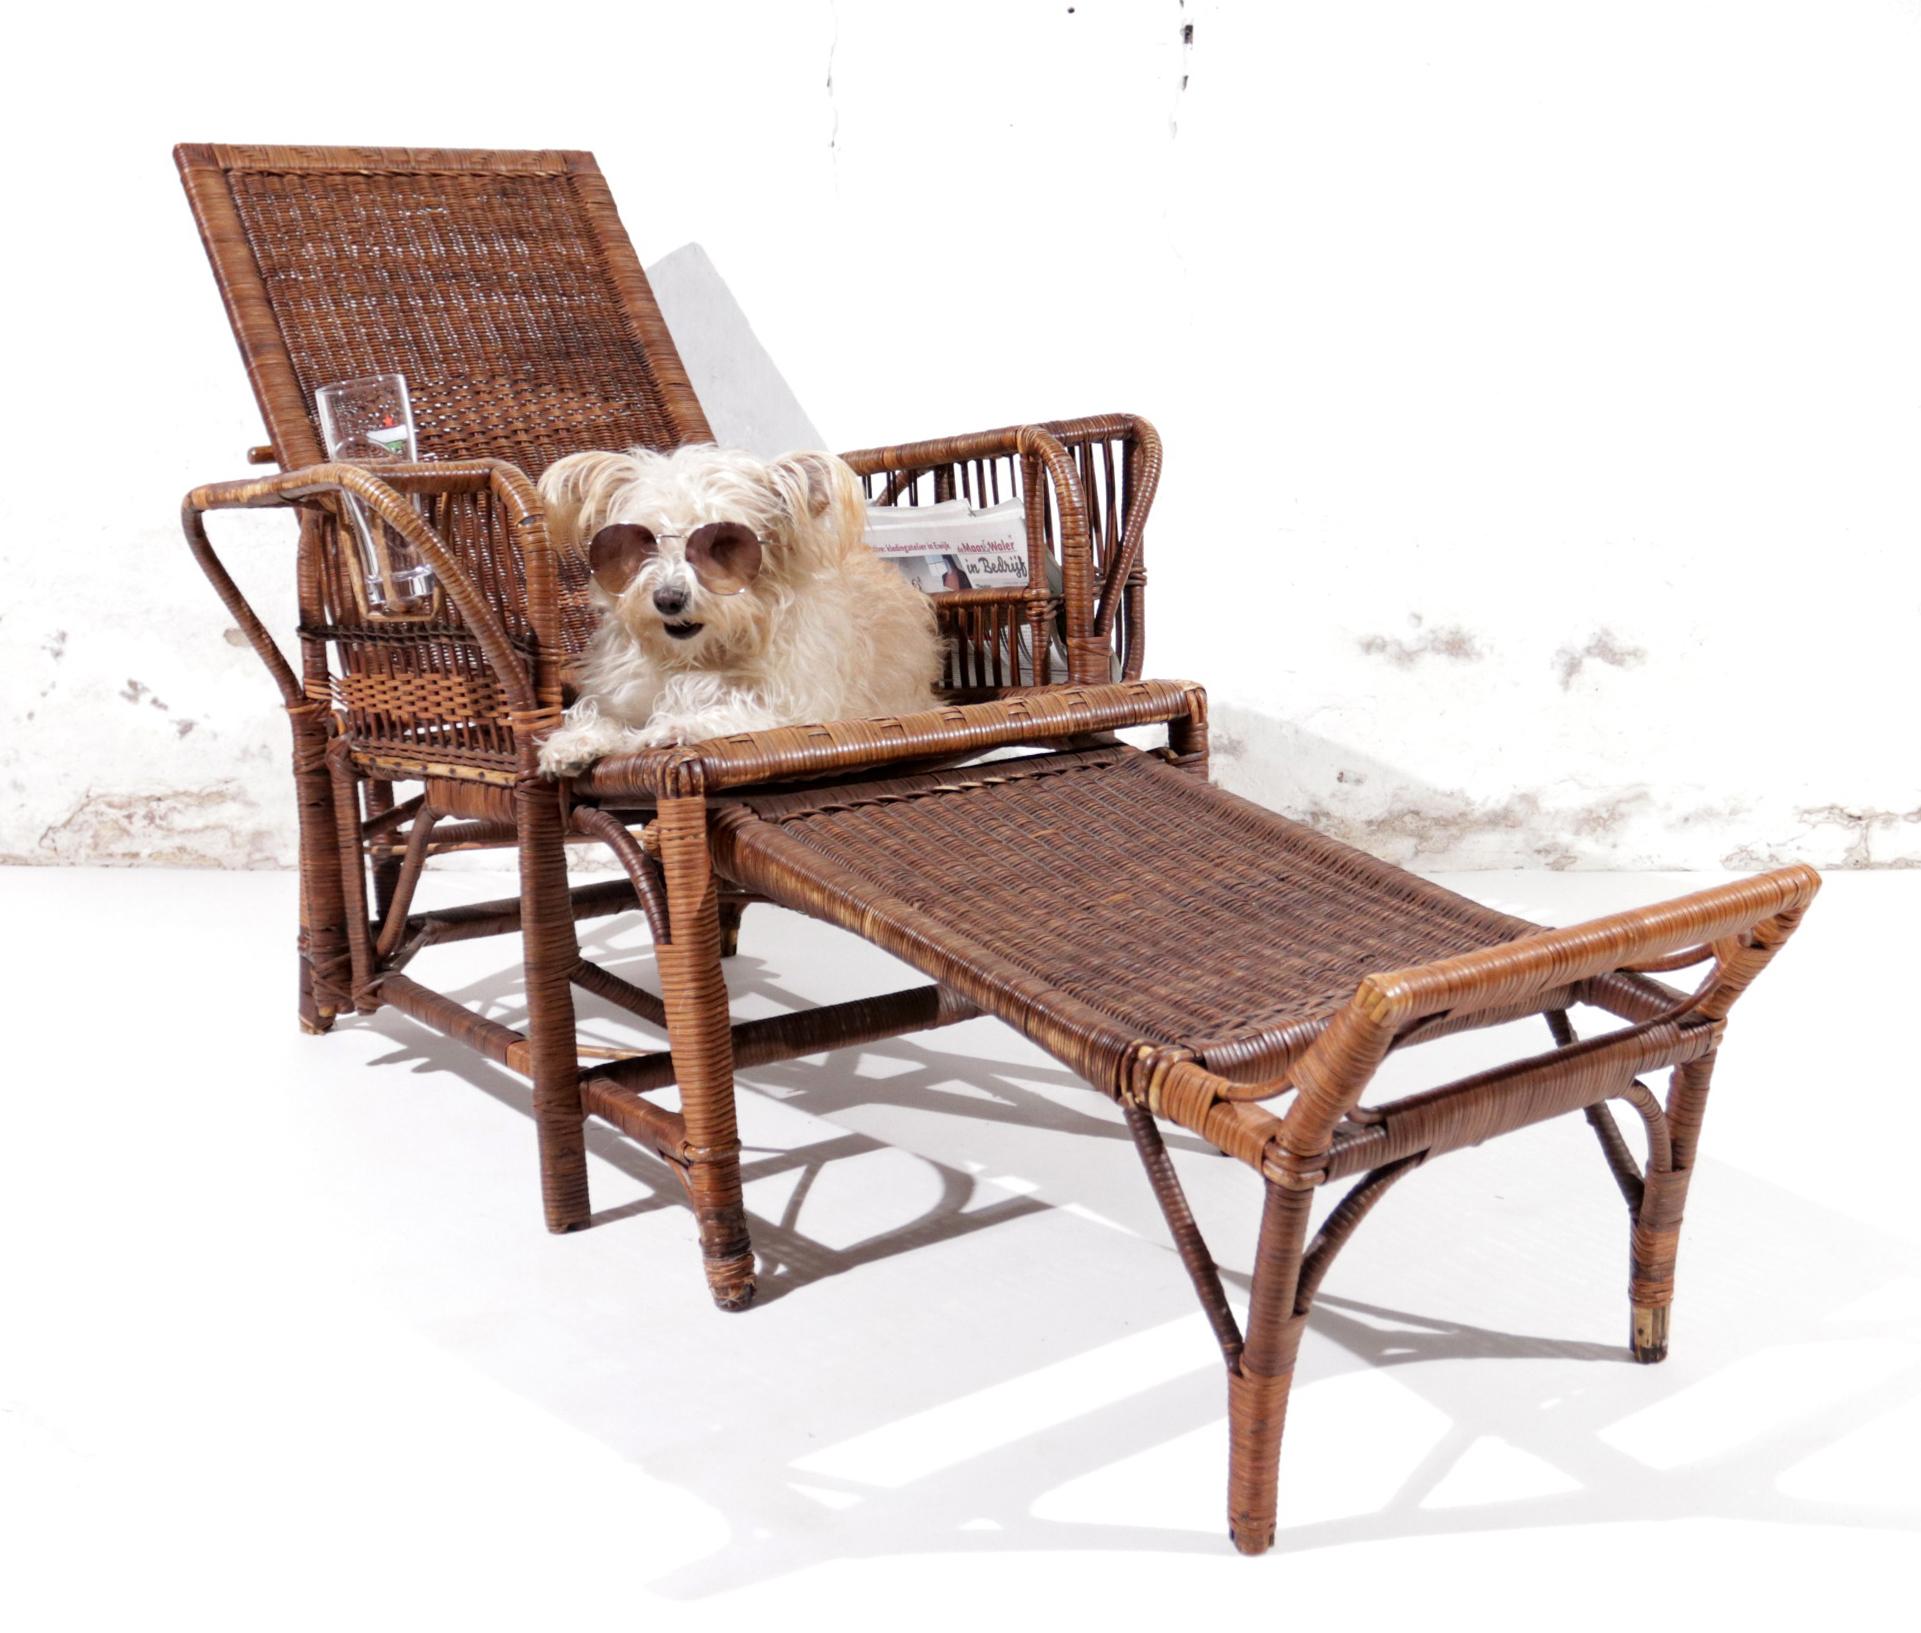 Rare and beautiful Bauhaus Lounger designed by Erich Dieckmann ca 1930.
Made of Rattan and Bamboo with steel parts that have a great patina.
In the armrest there is a cupholder and on the other side you can store your newspaper or